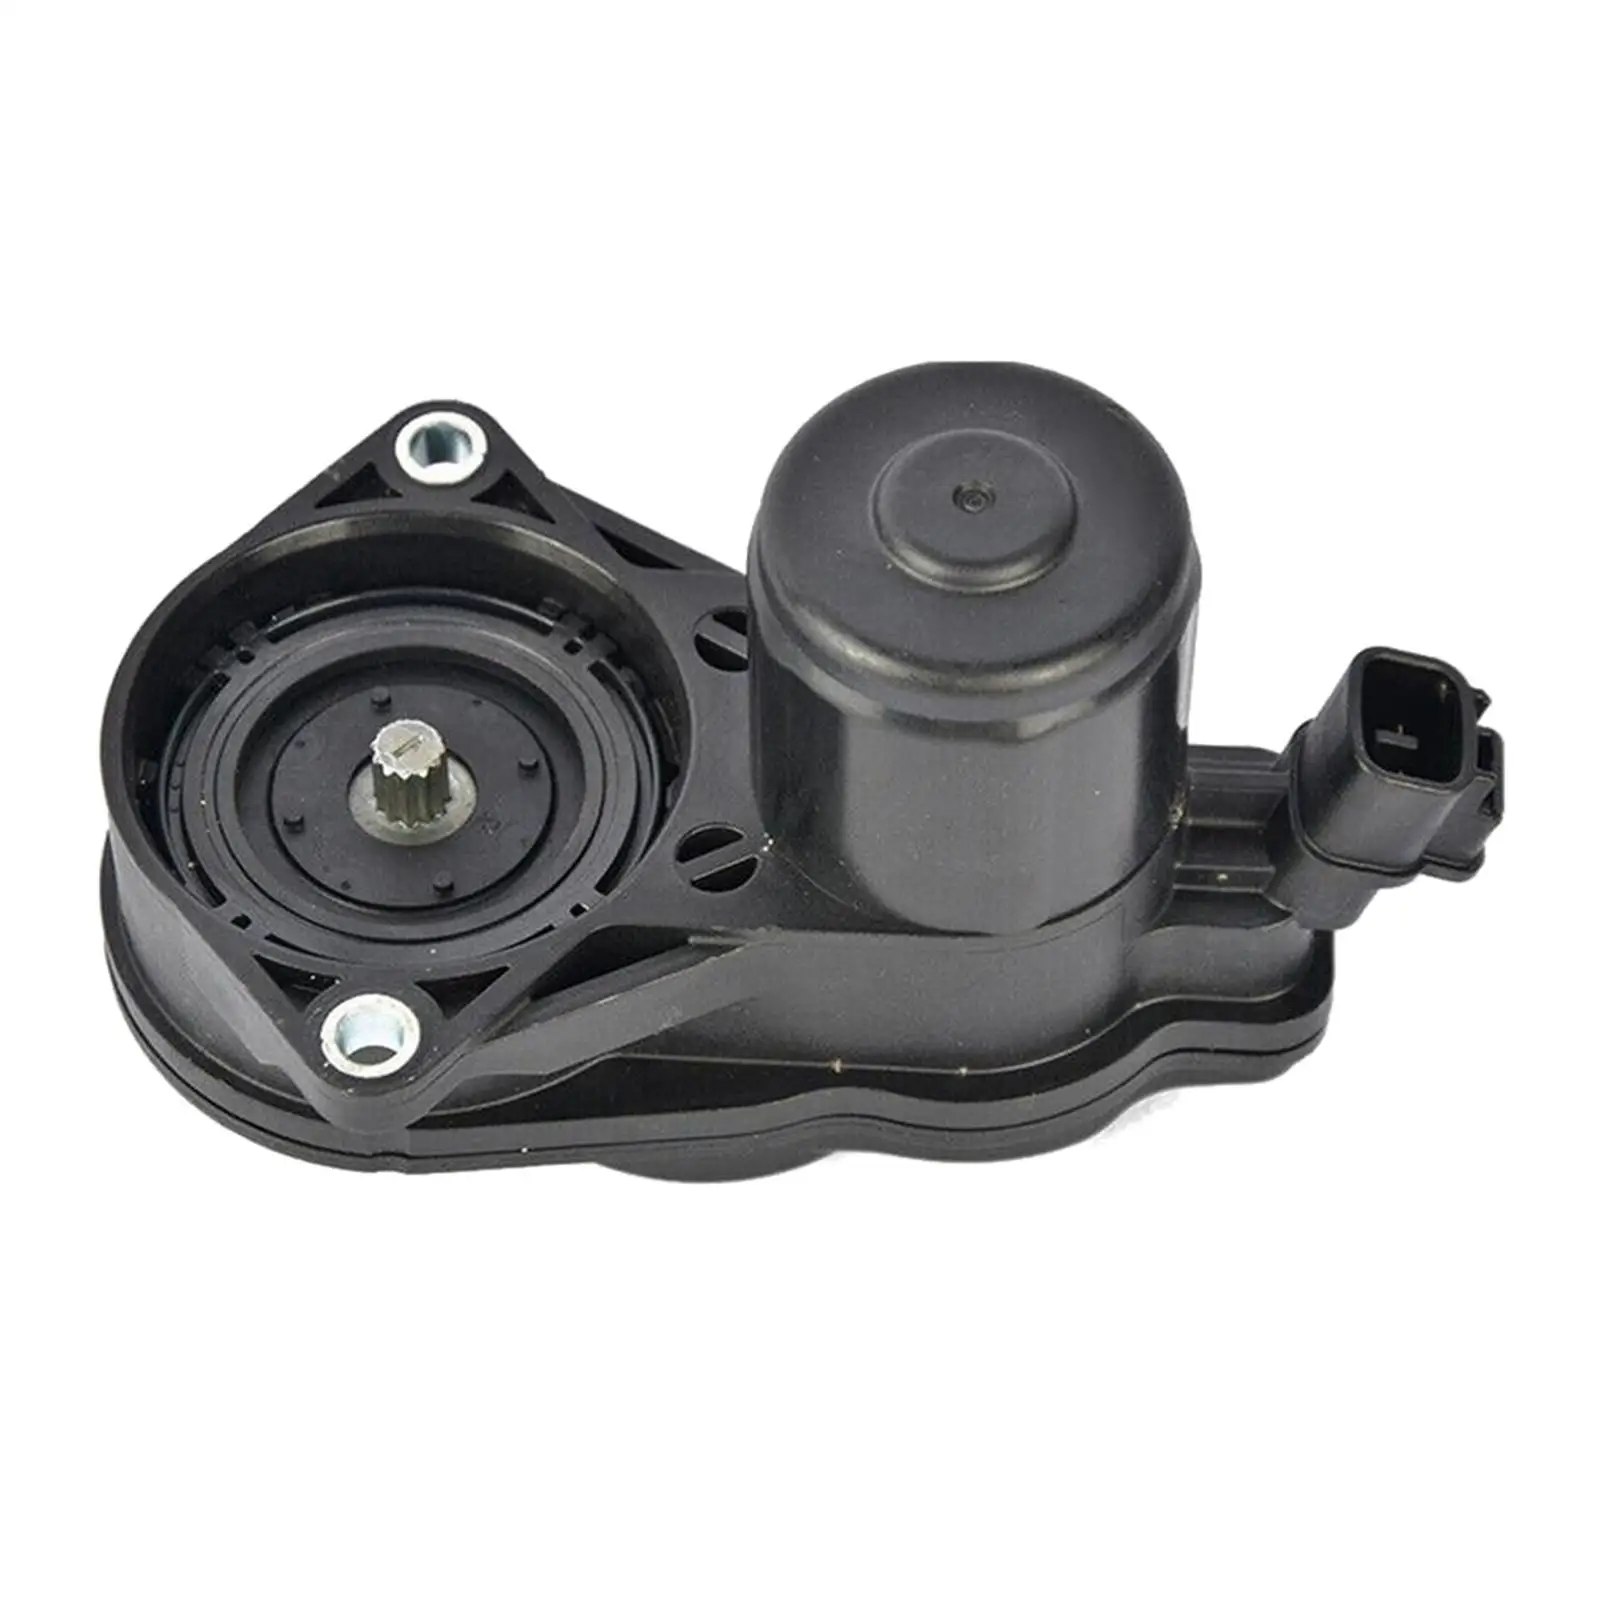 Parking Brake Actuator Car Accessories 46310-33010 Replaces for Toyota for sienna Corolla Sedan for c-hr Durable